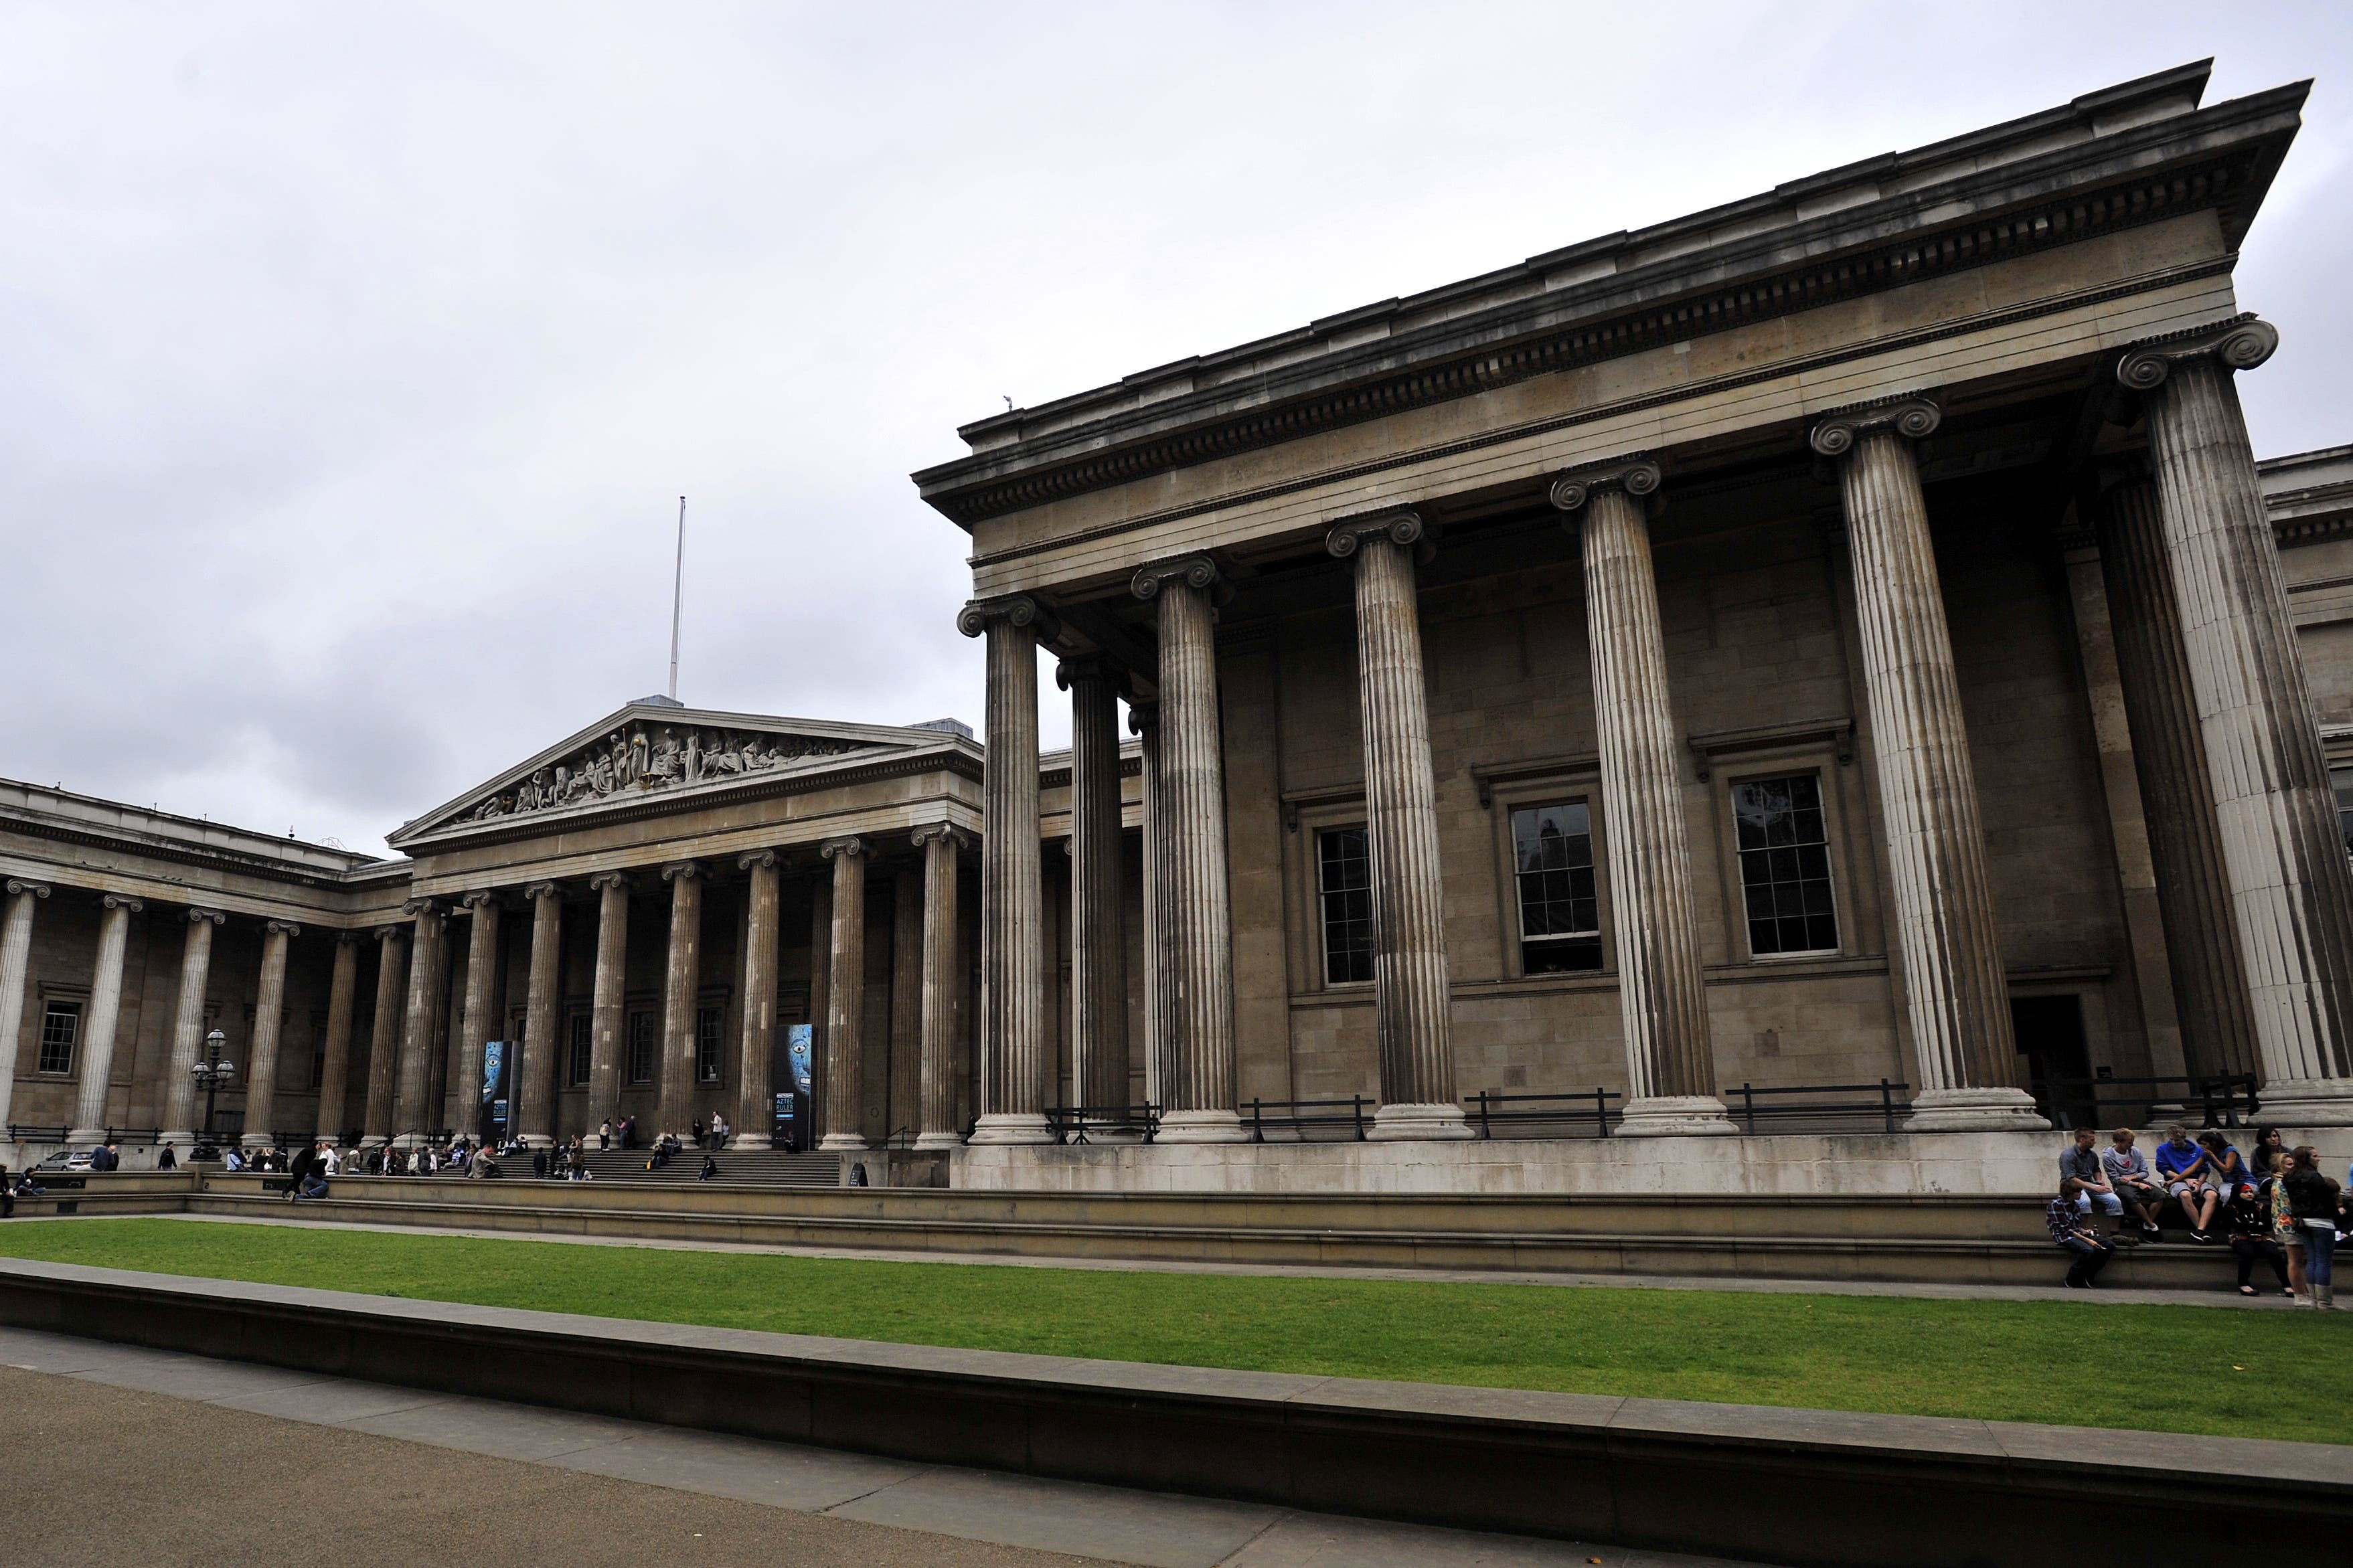 A member of staff at the British Museum in Bloomsbury has been fired after the thefts came to light